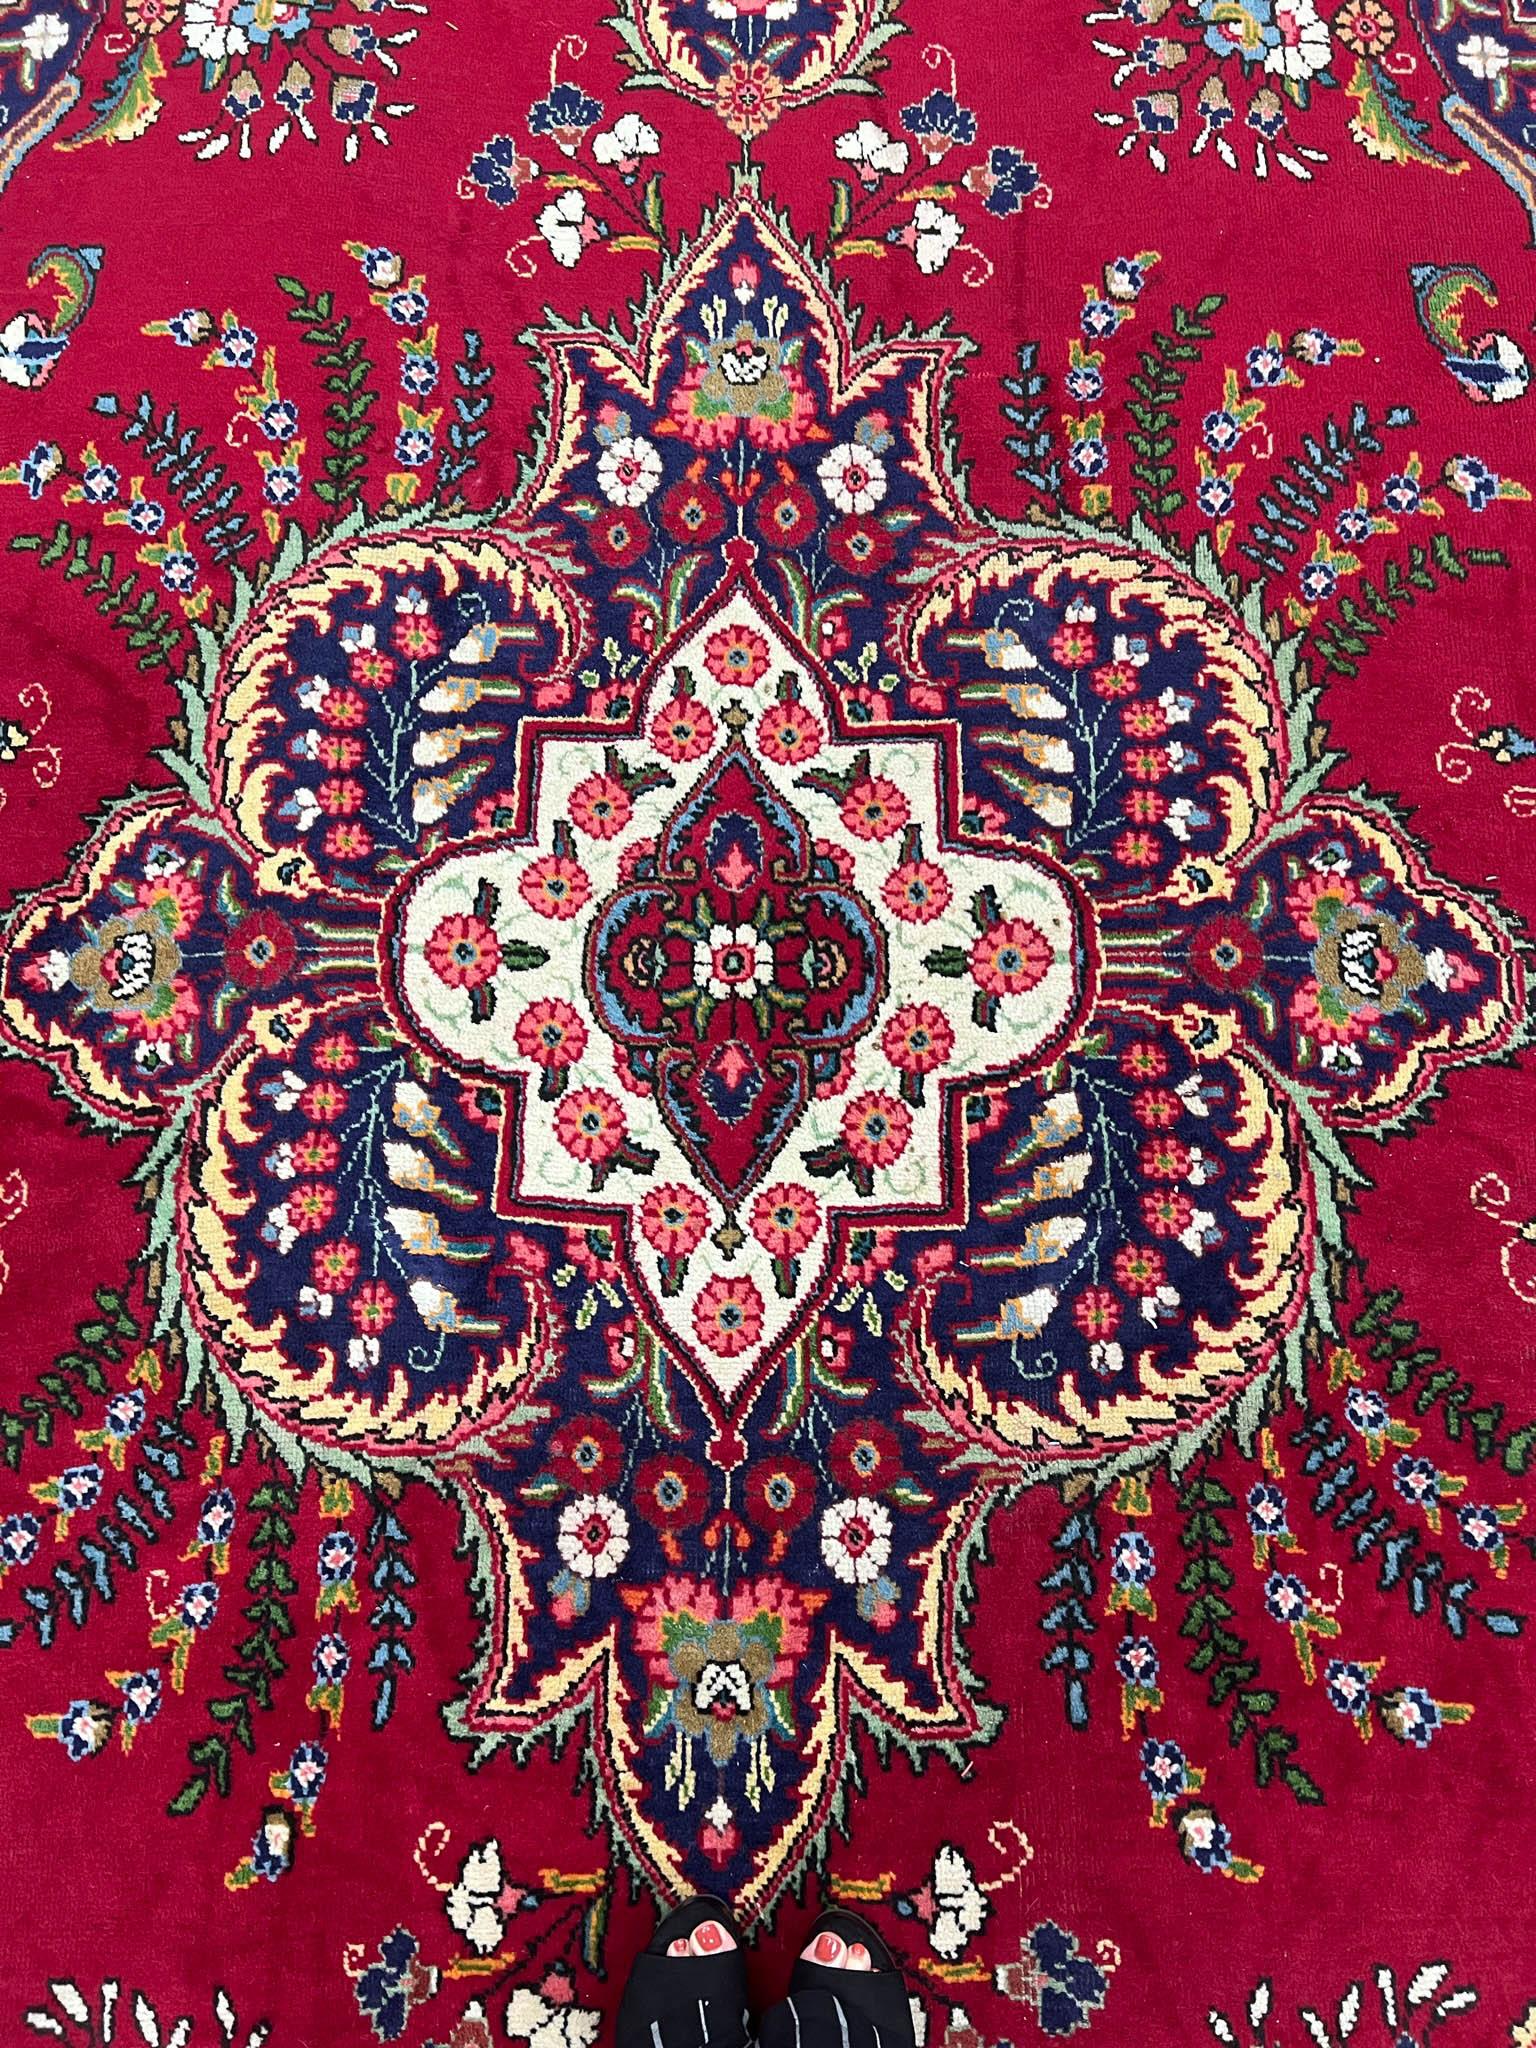 10' x 13' Persian Tabriz Area Rug  In Good Condition For Sale In Palm Beach Gardens, FL